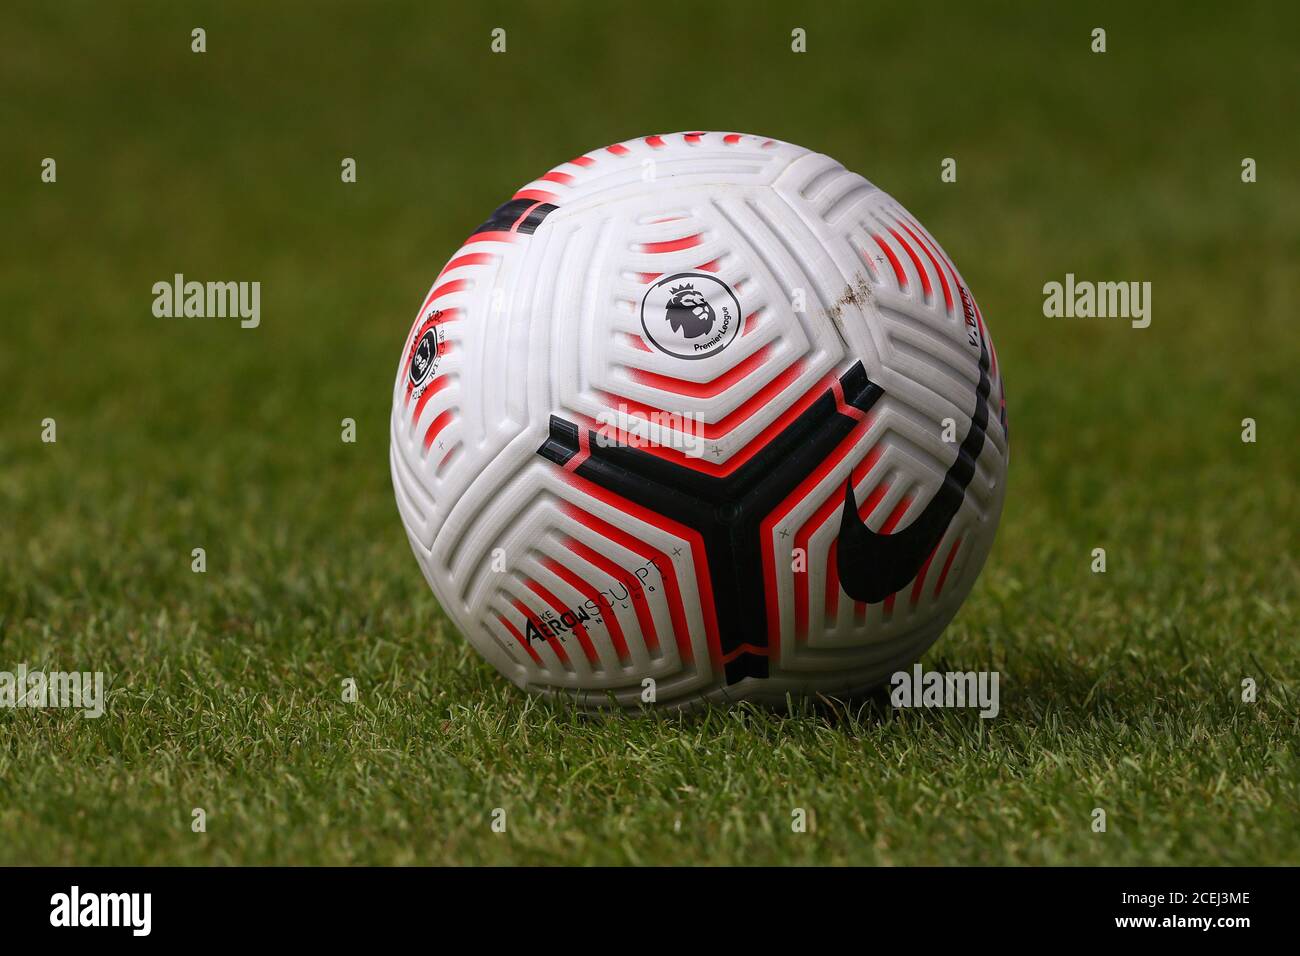 The Nike Flight, Official match ball of the Premier League 2020/21 - Ipswich Town v West Ham United, Pre-Season Friendly, Portman Road, Ipswich, UK - 25th August 2020  Editorial Use Only Stock Photo